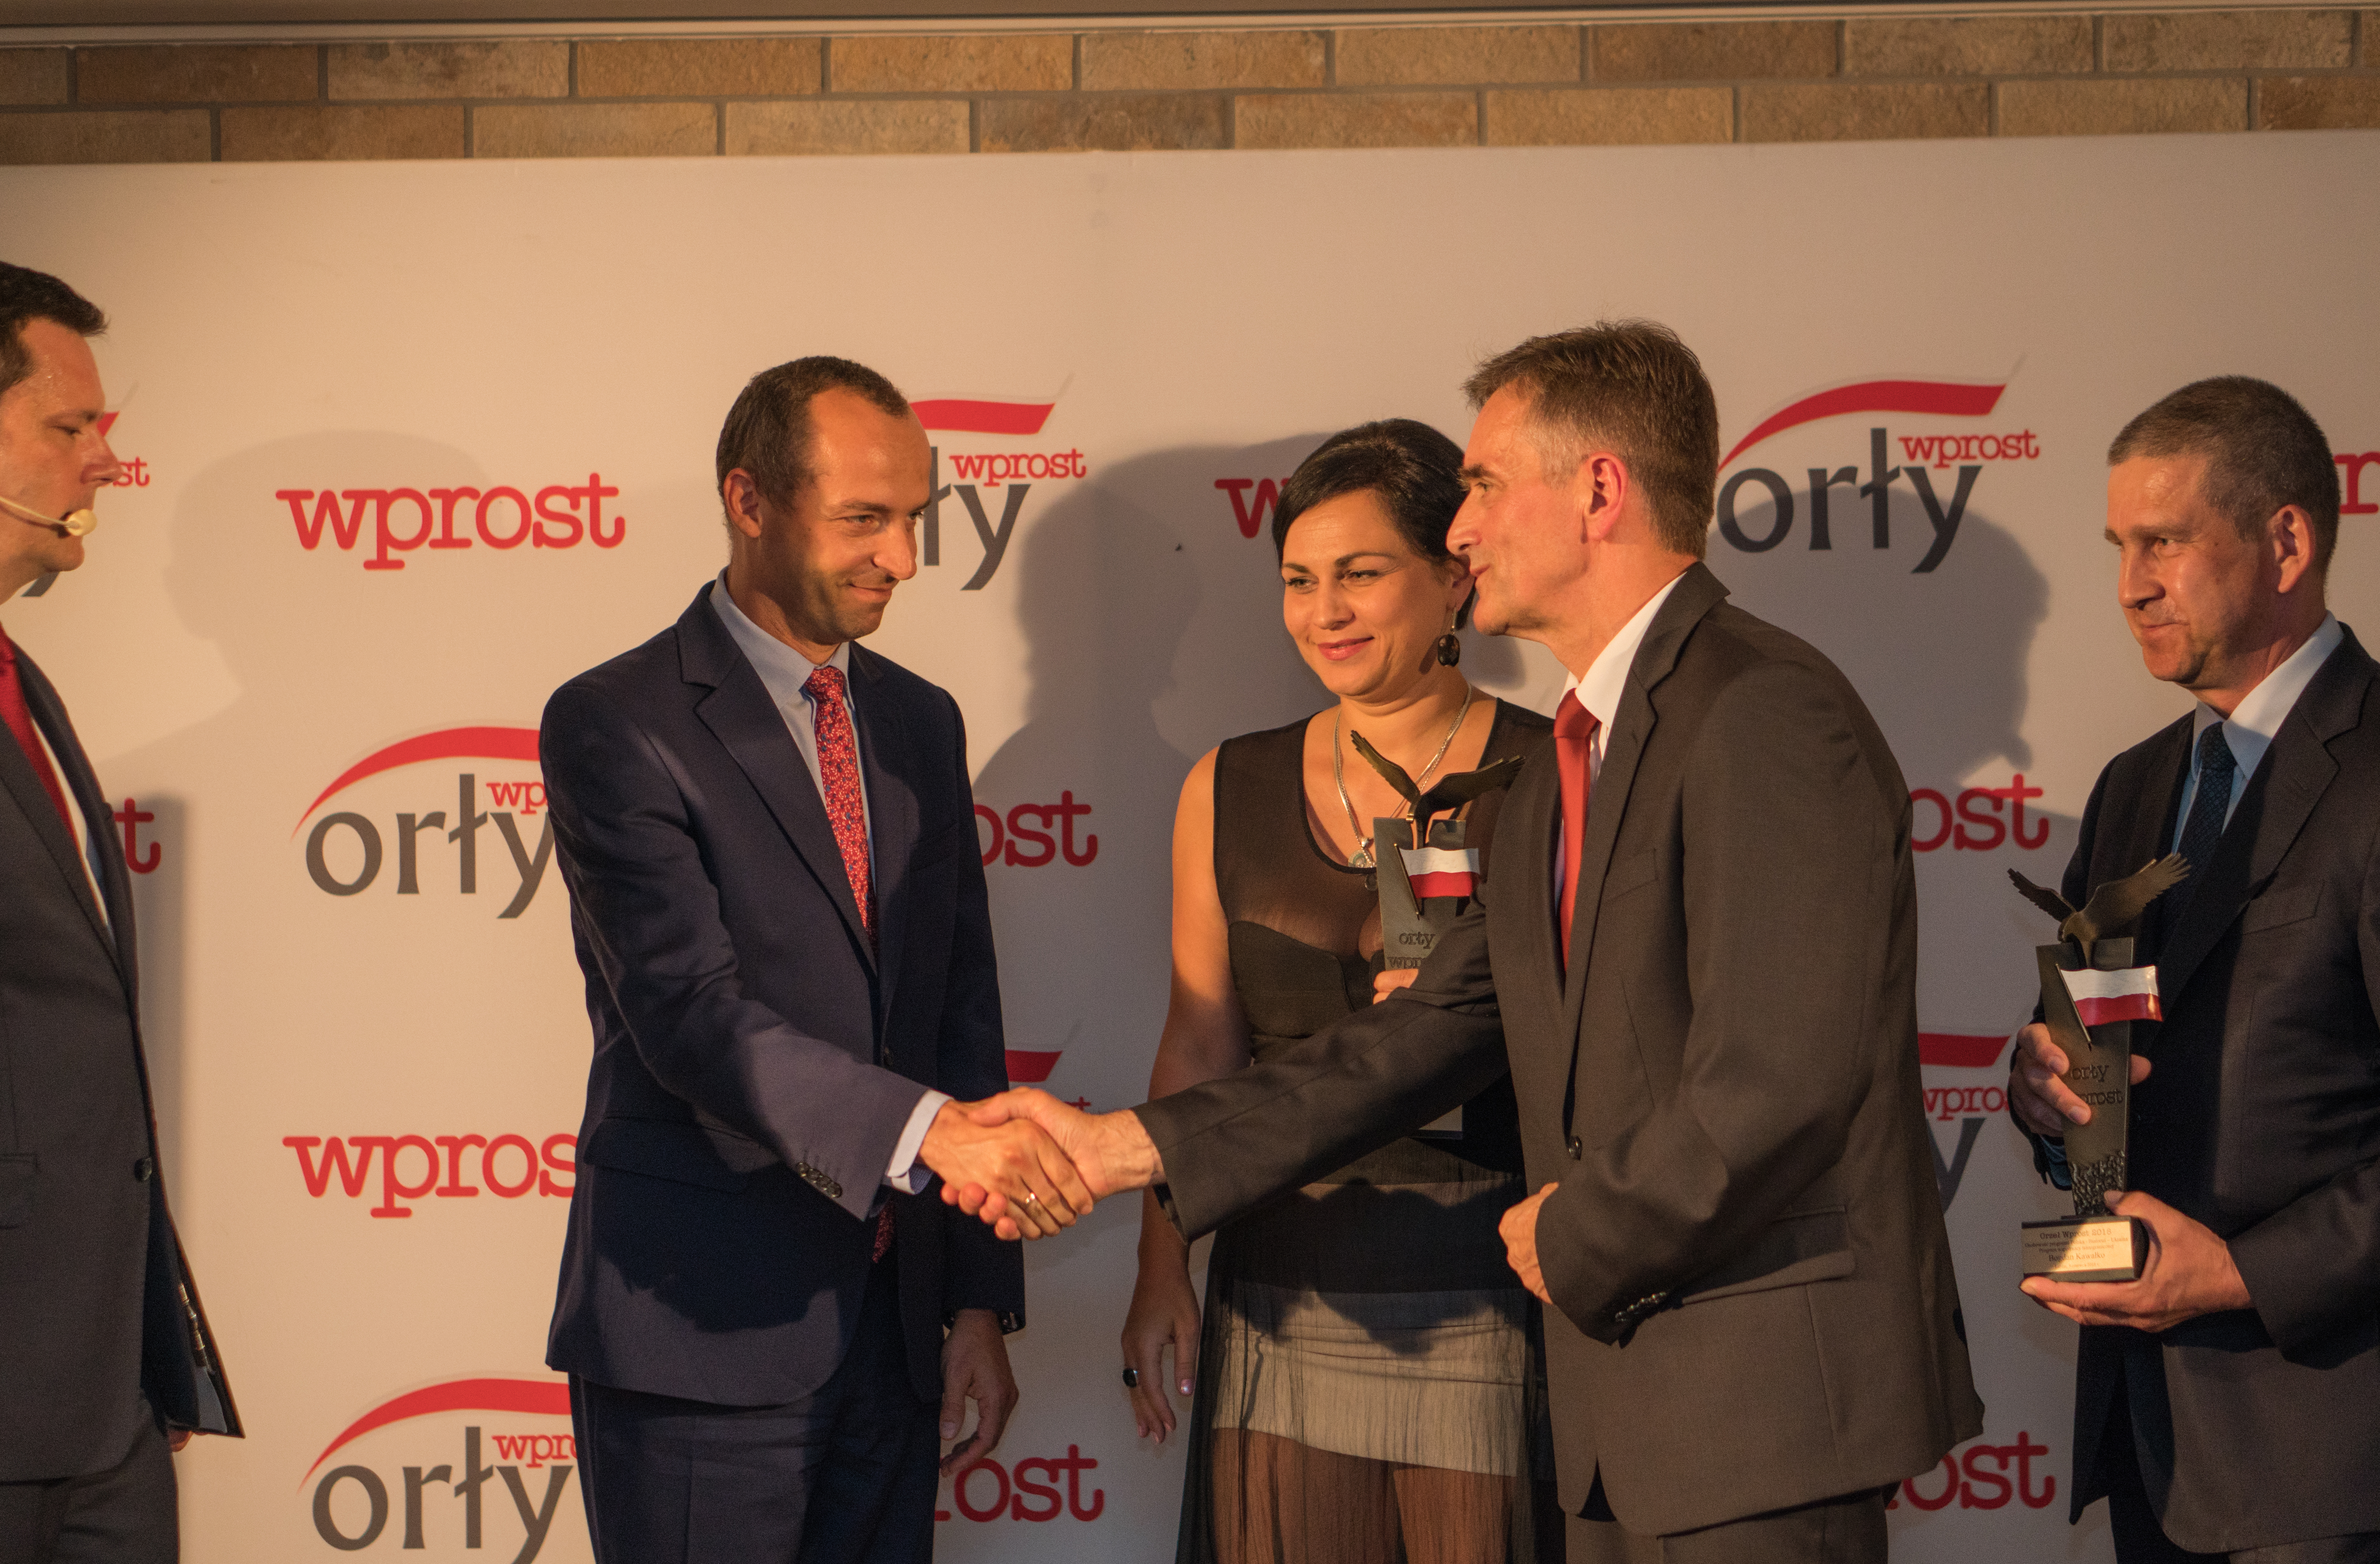 the “Wprost” weekly handed the prestigious "Orły Wprost” prizes